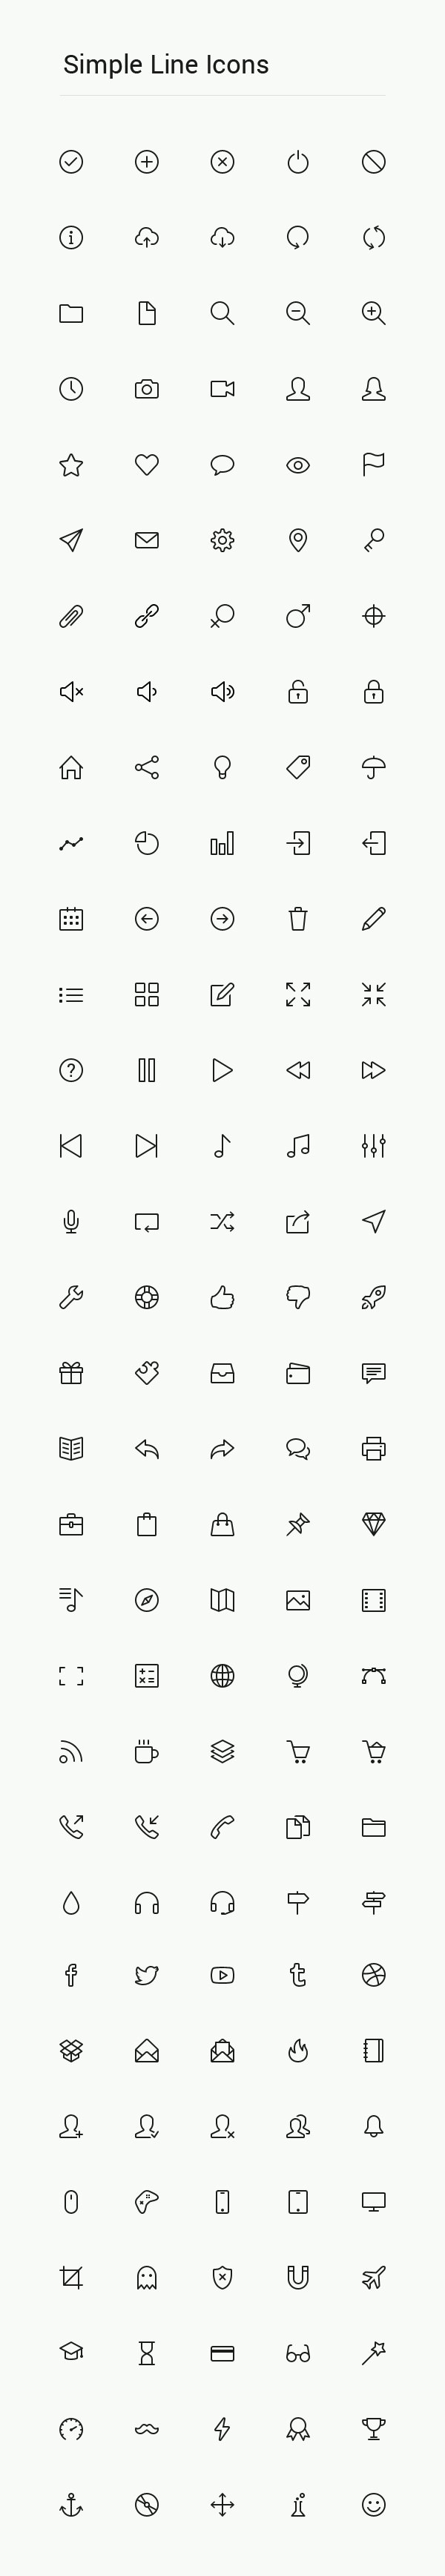 Simple-Line-Icons-Webfont-600